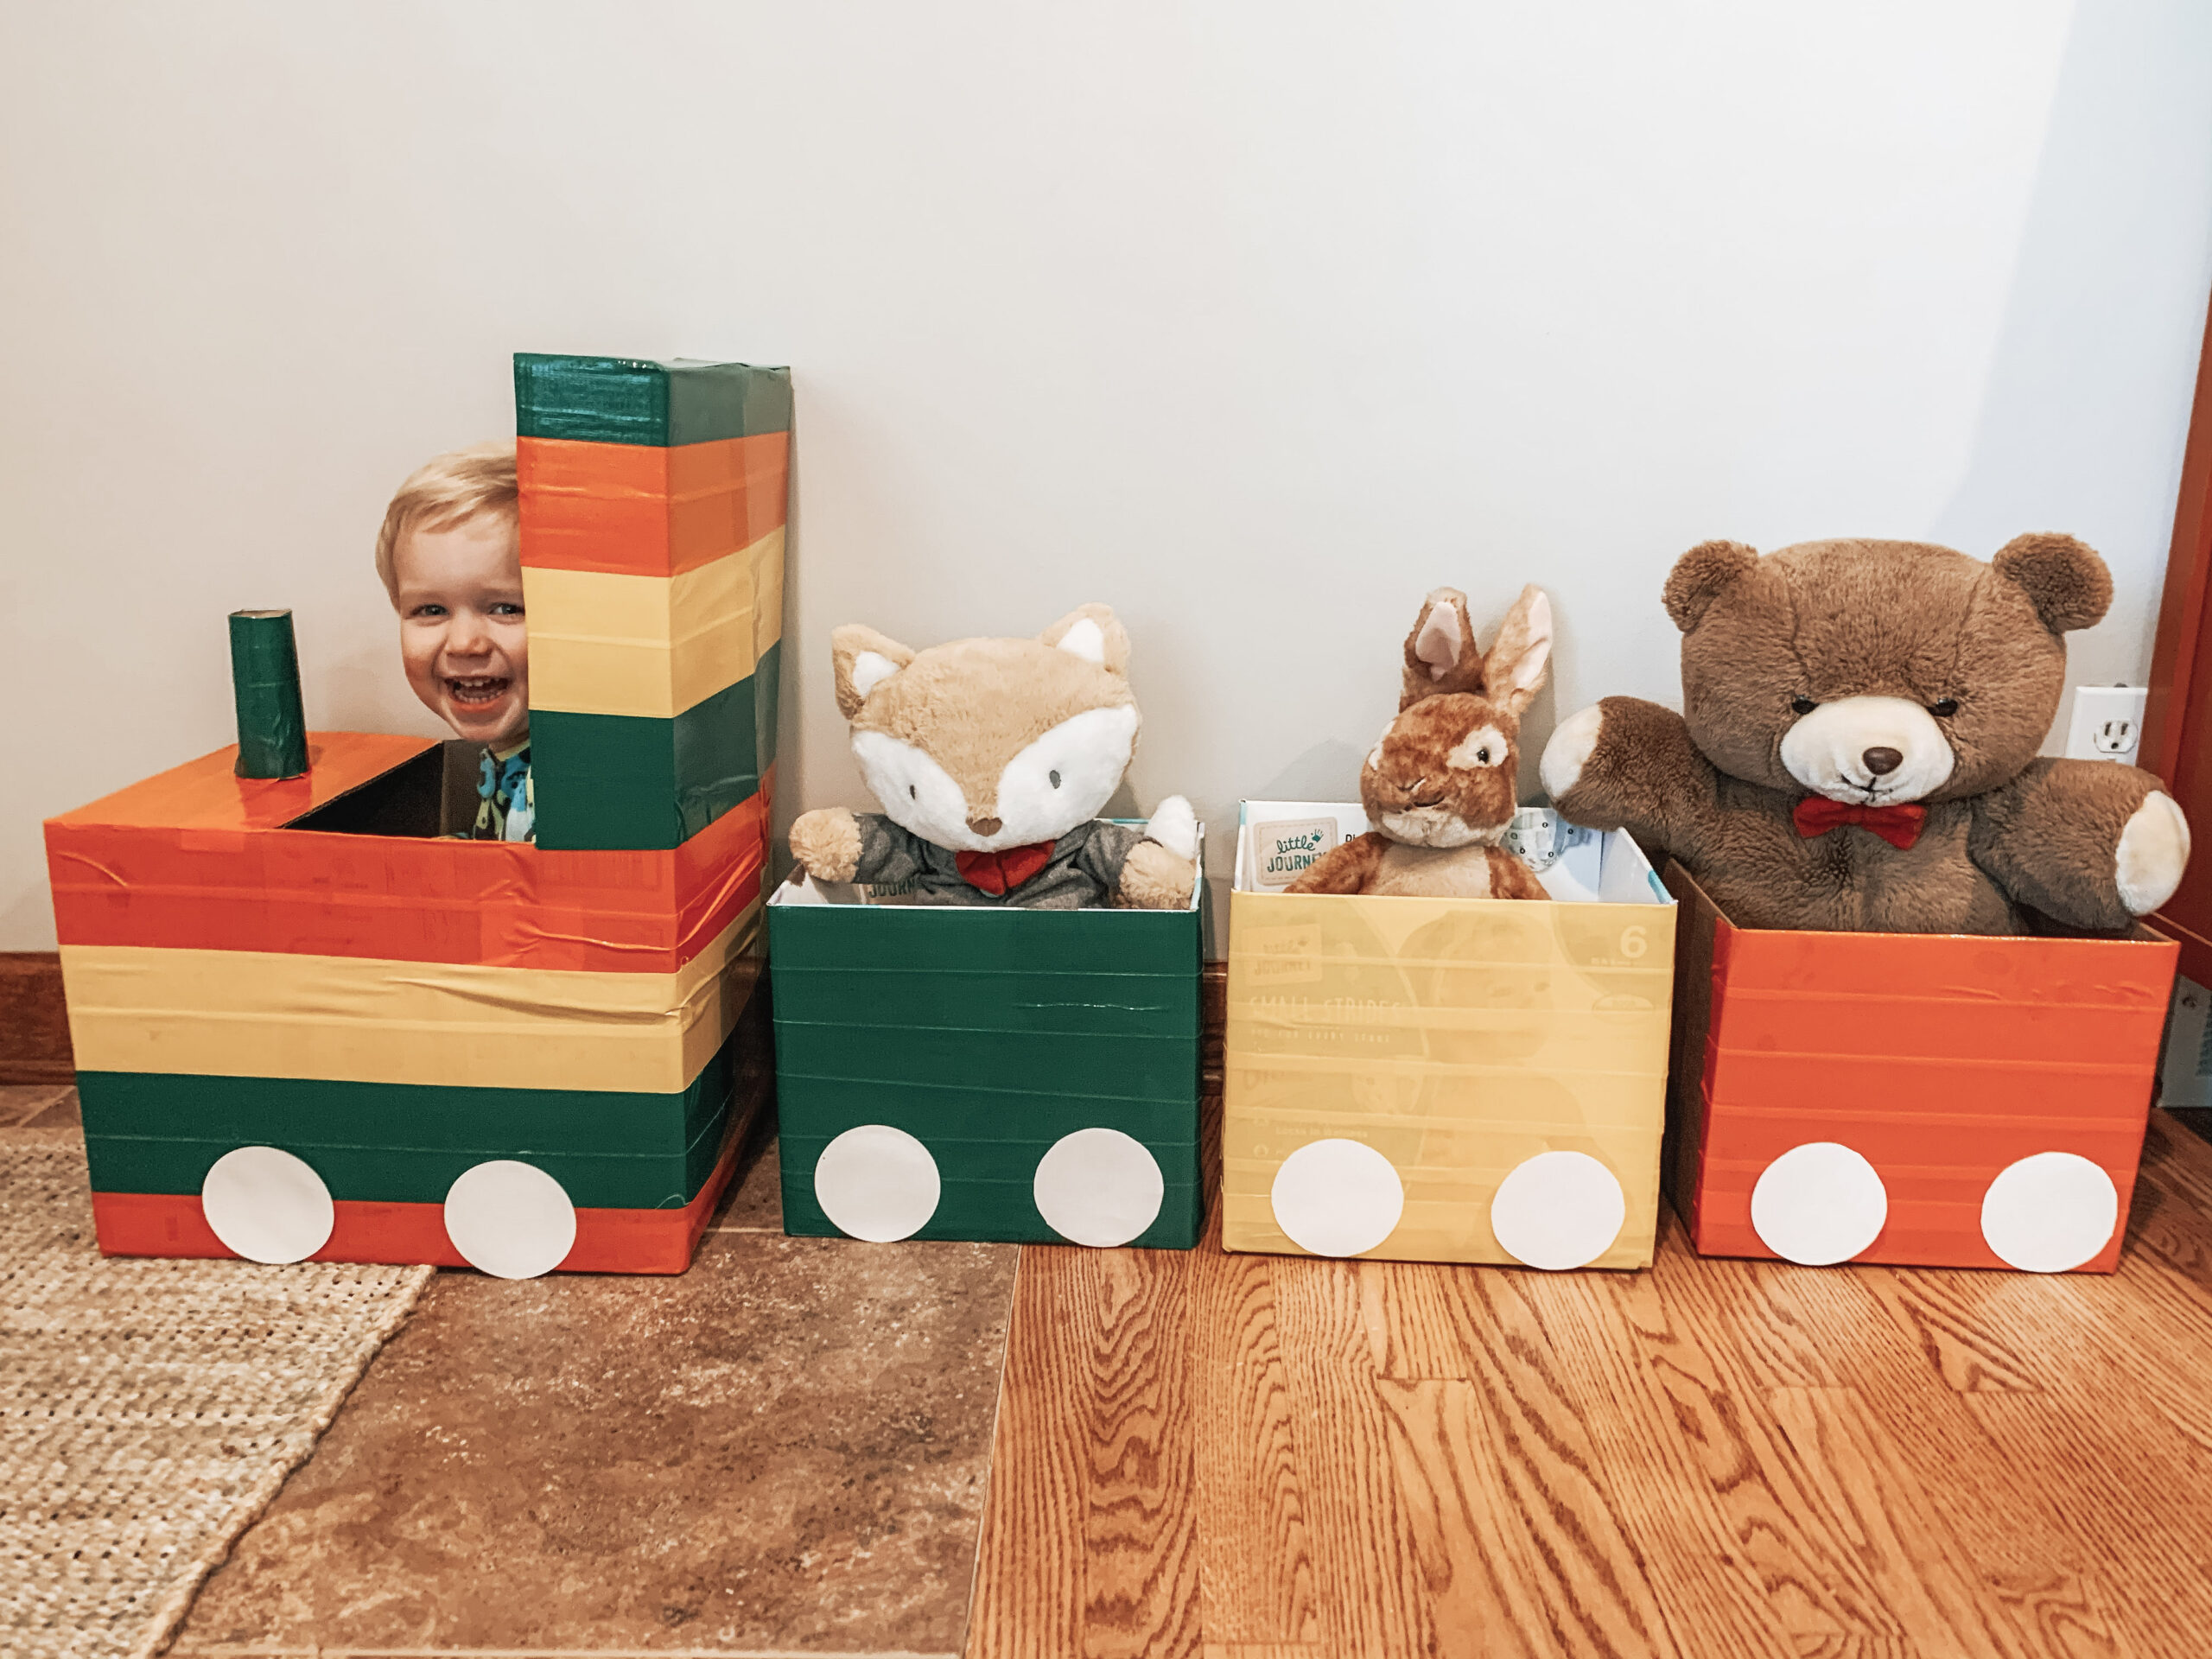 Kid playing with repurposed cardboard train with stuffed animals in the train cars